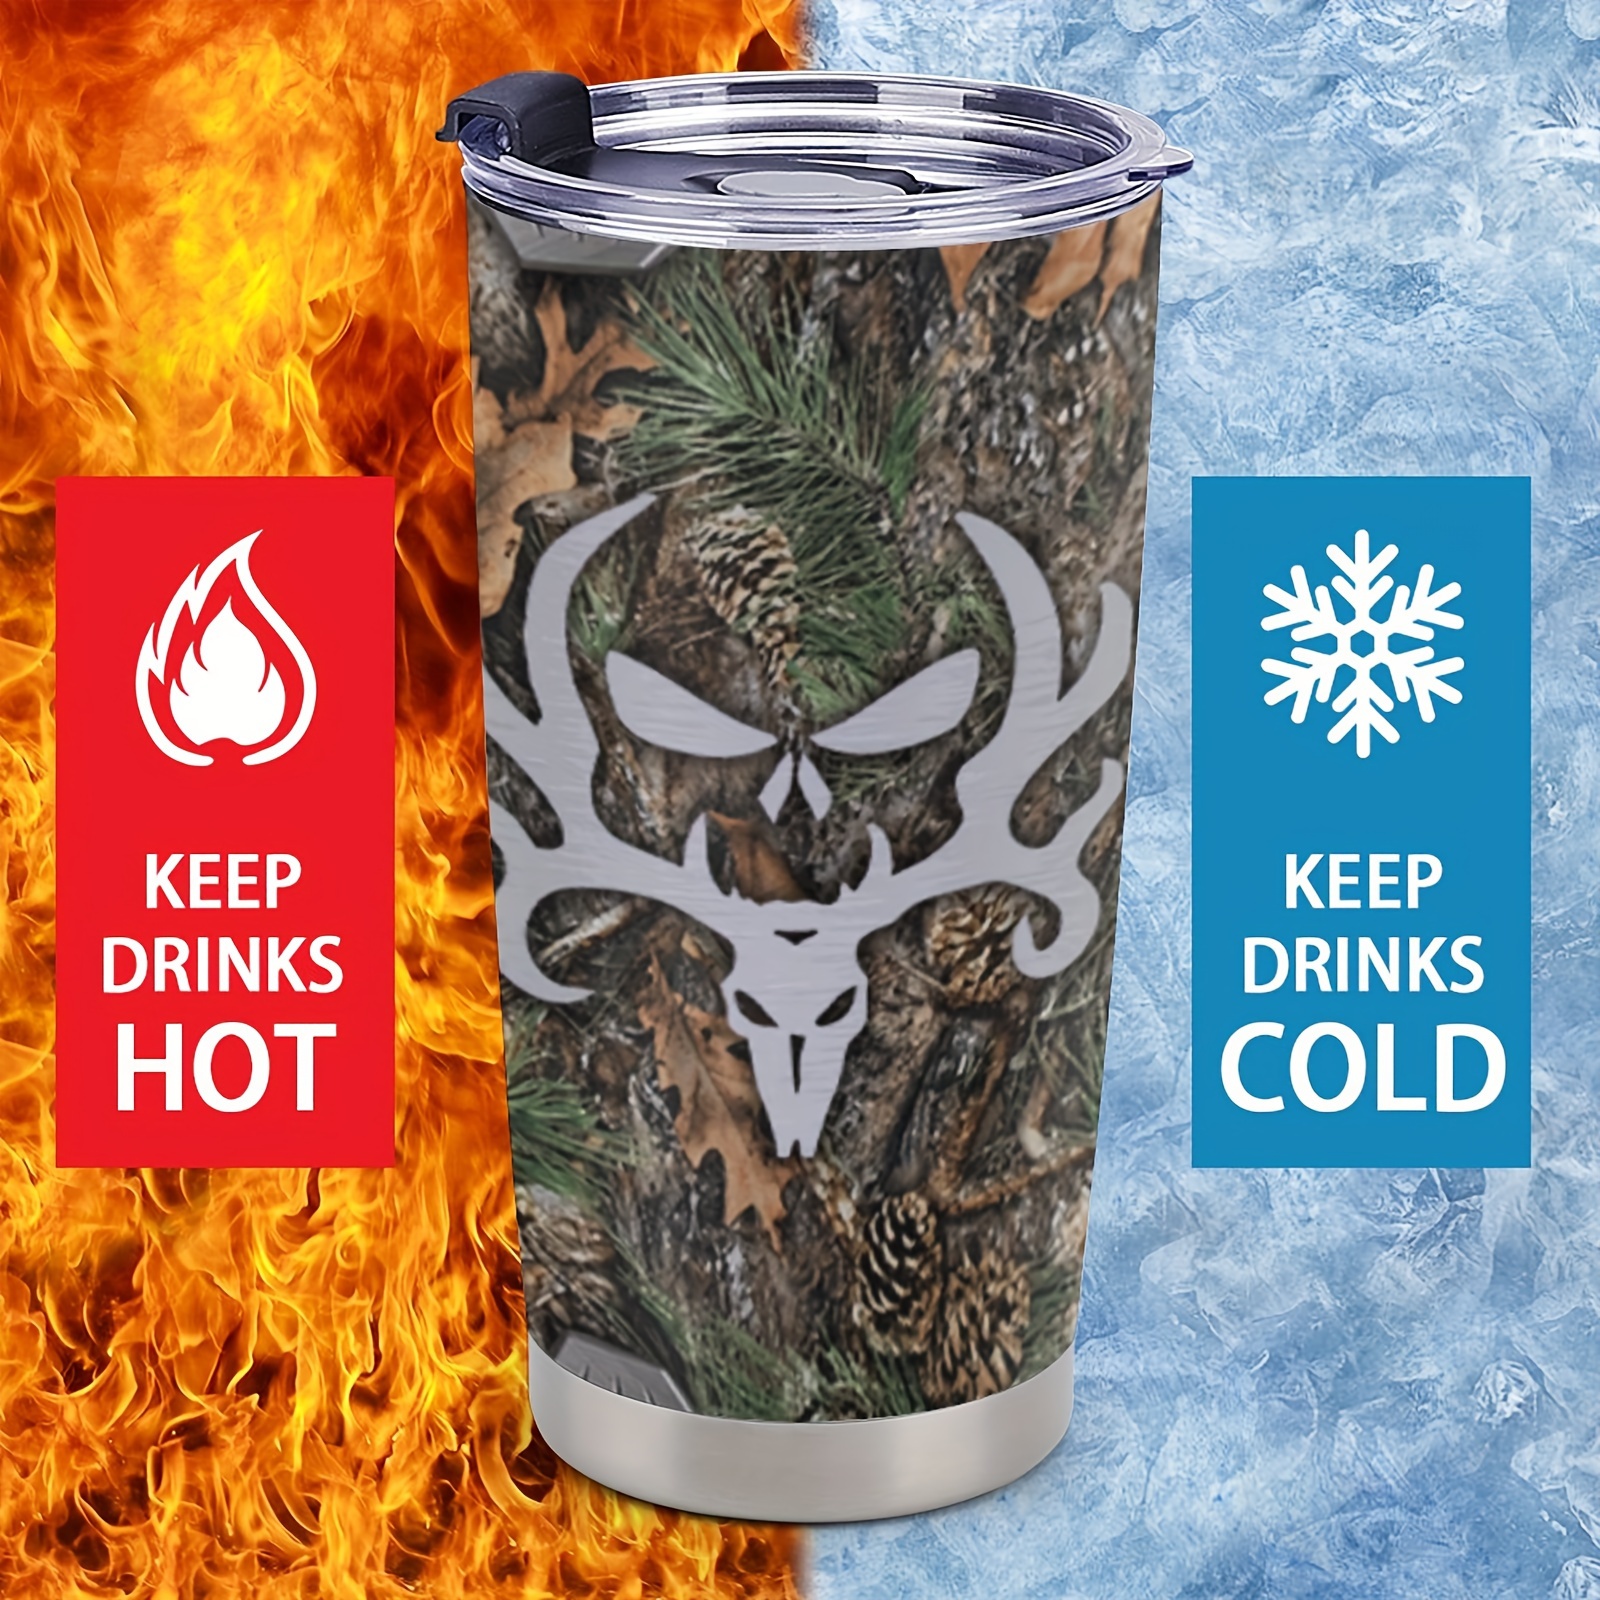 winorax Deer Hunting Tumbler 4-in-1 Can Cooler Hunter Gifts For Men Hunters  Stainless Steel 16oz The…See more winorax Deer Hunting Tumbler 4-in-1 Can